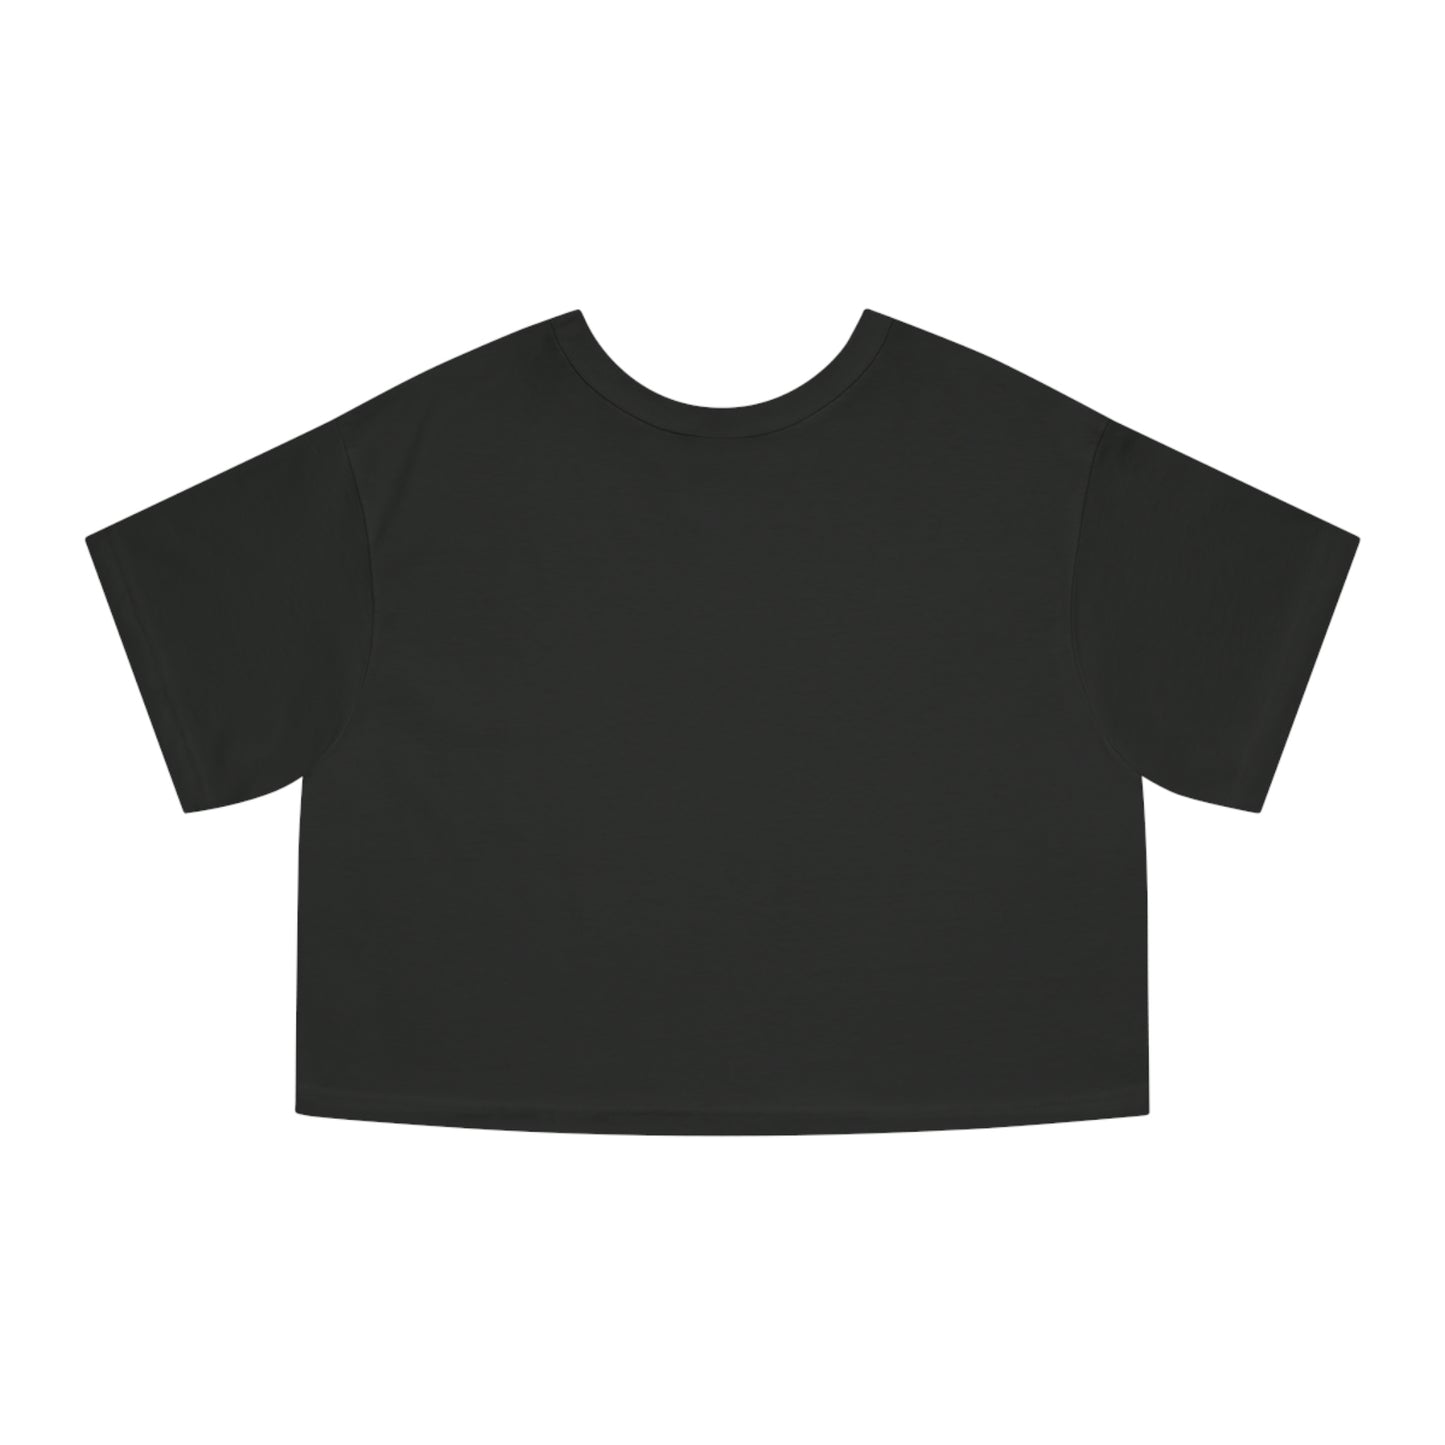 Unlimited Cropped T-Shirt